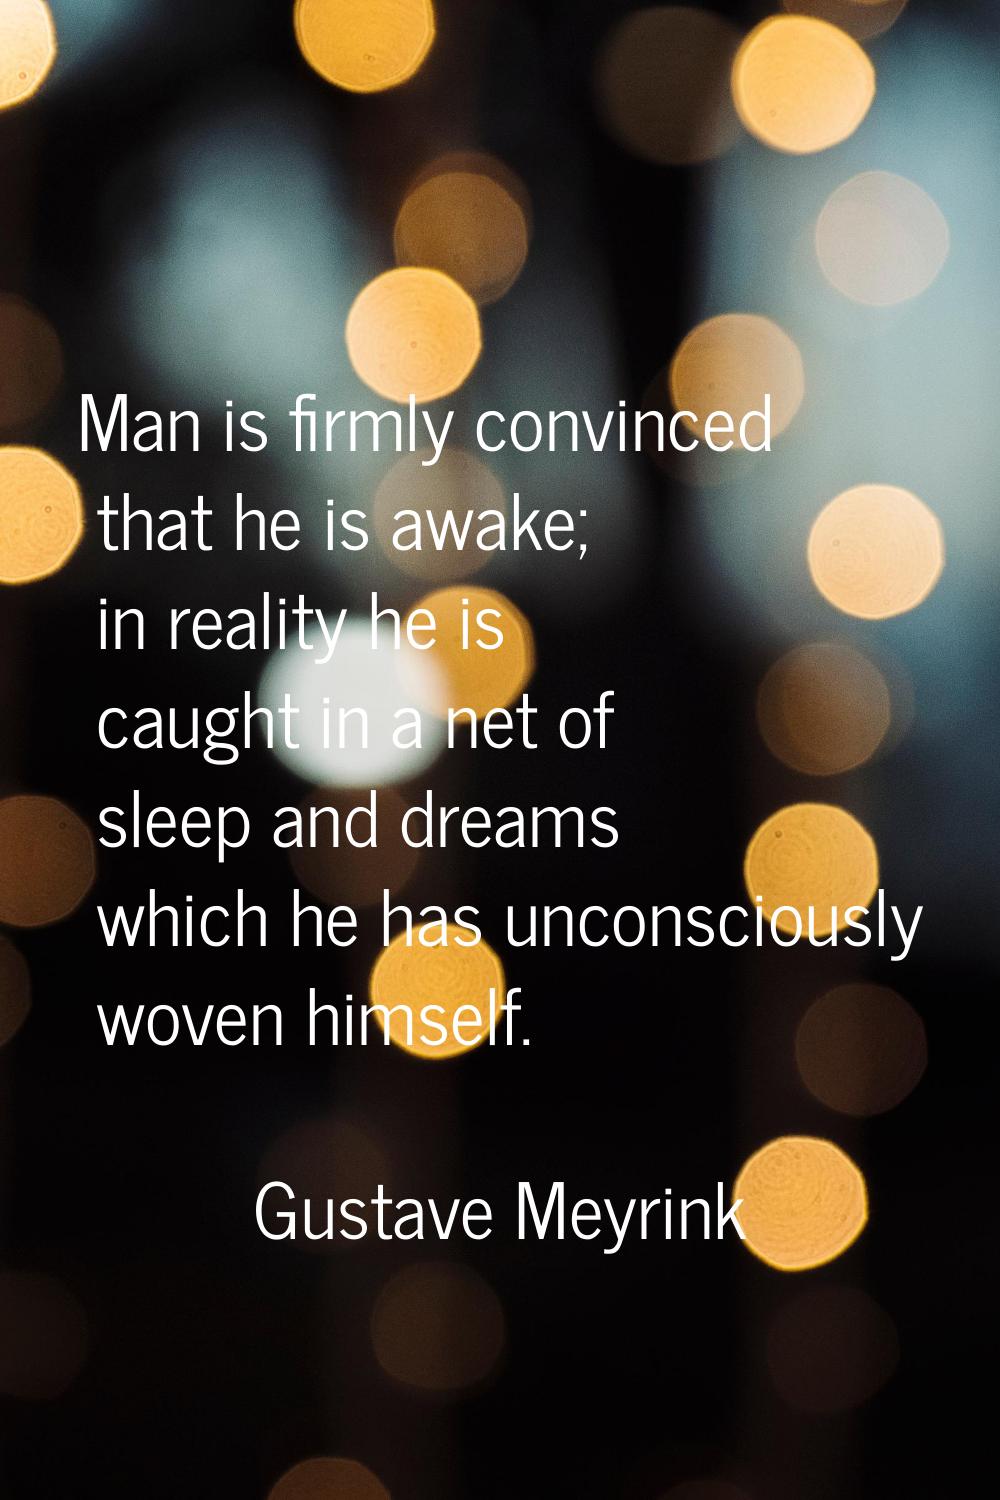 Man is firmly convinced that he is awake; in reality he is caught in a net of sleep and dreams whic